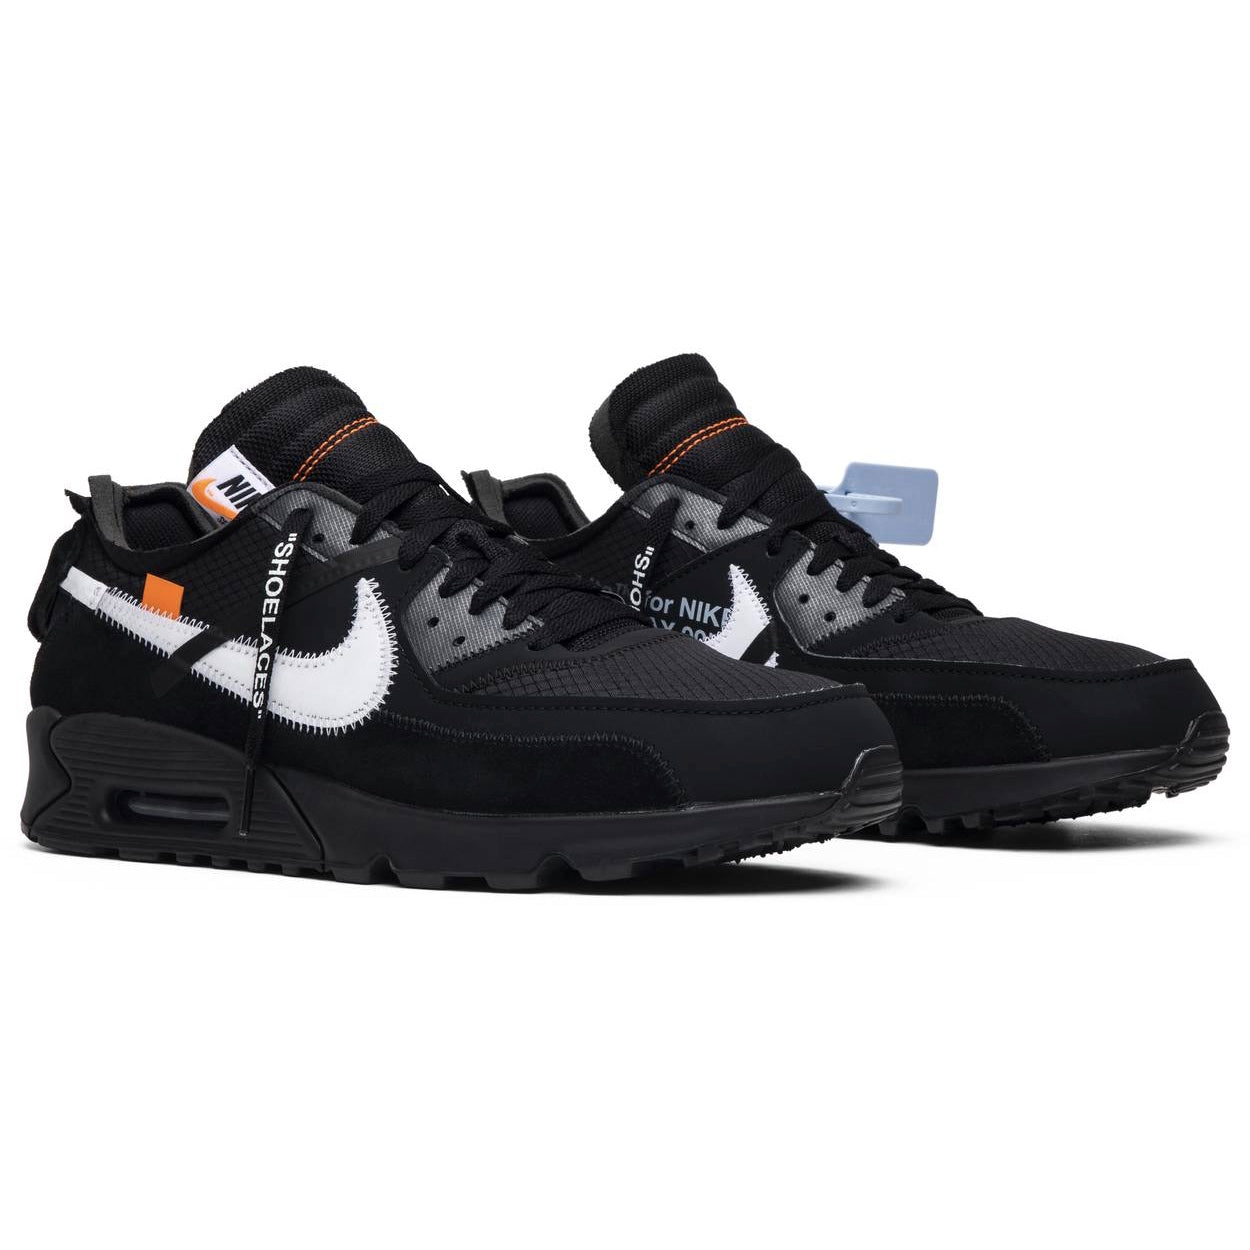 Air Max 90 OFF-WHITE Black - After Burn